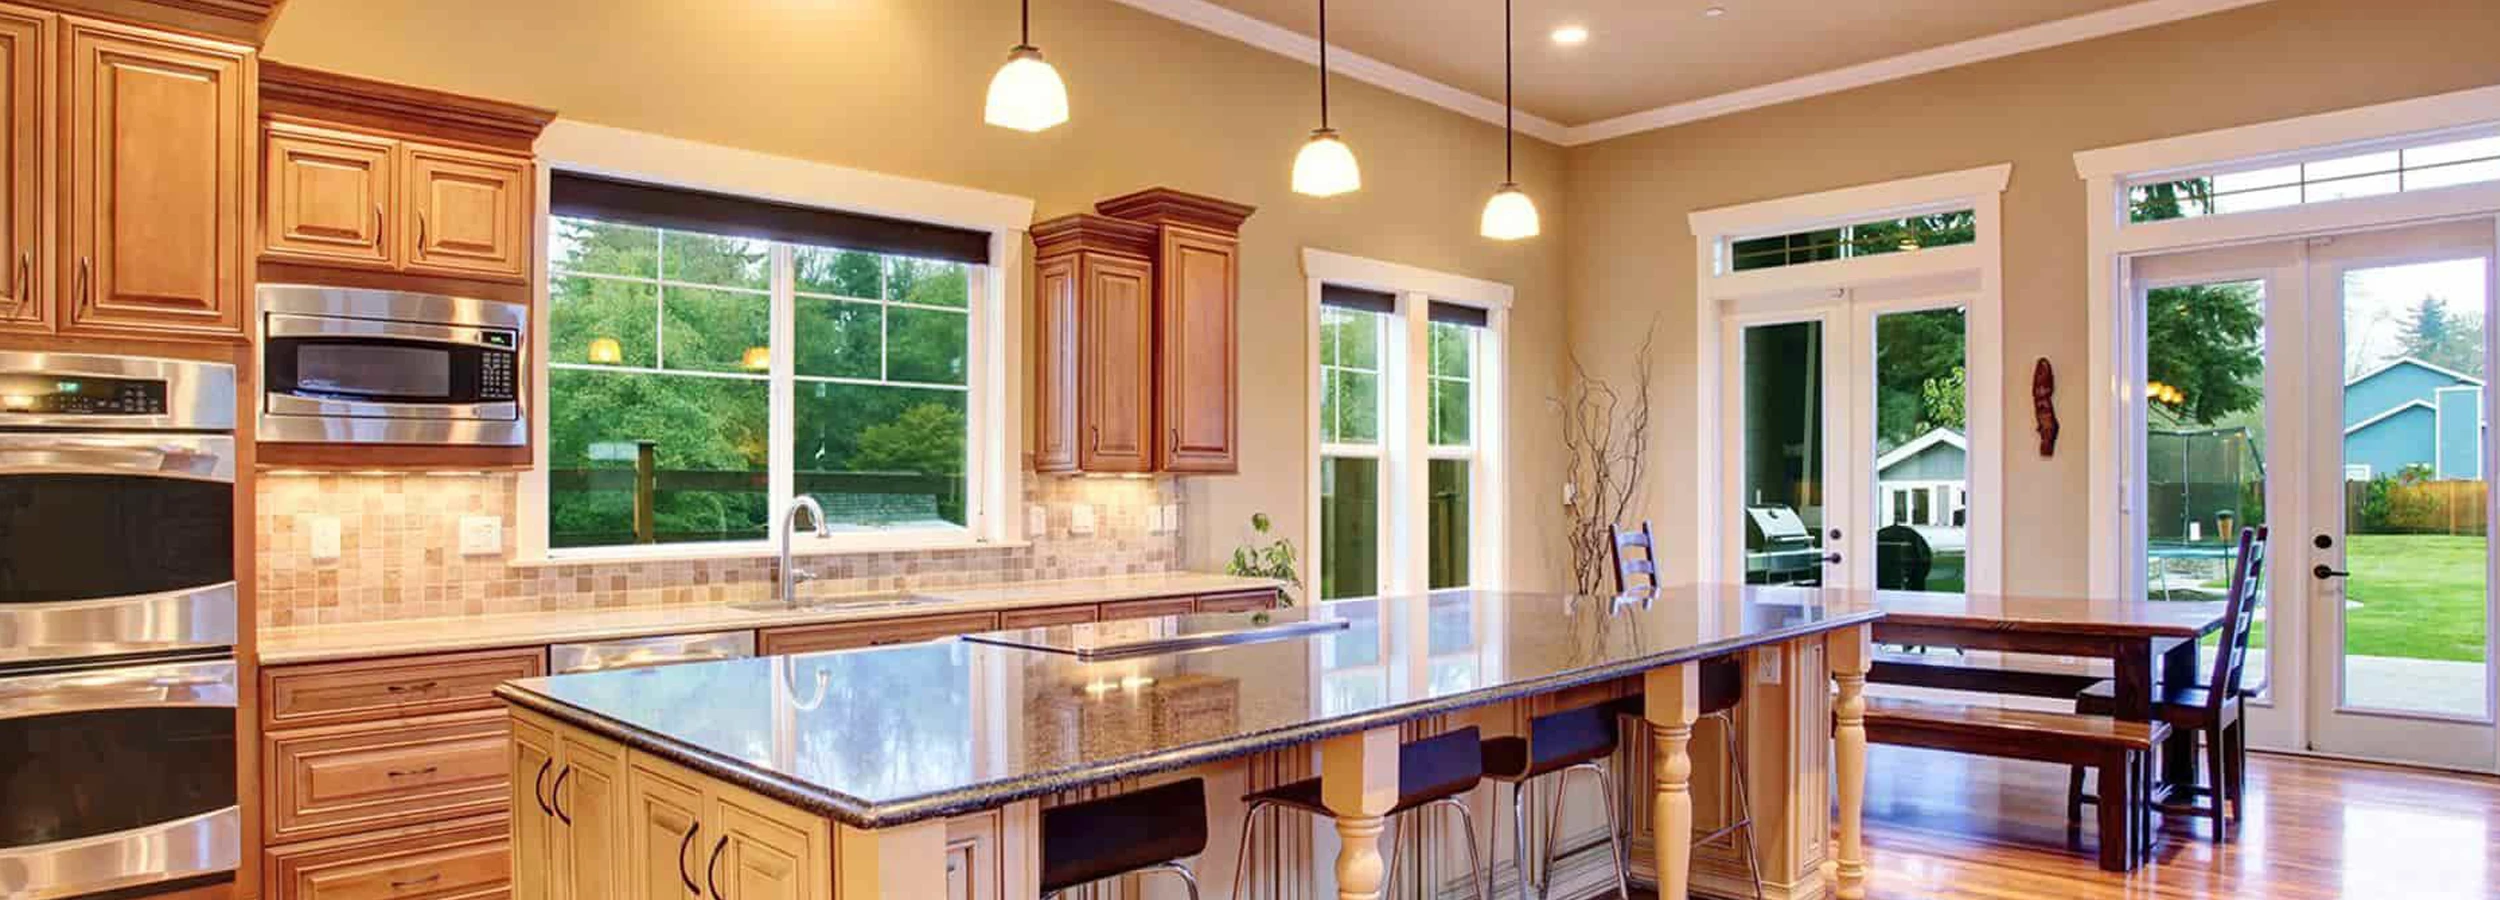 Brown kitchen with granite island and french doors opening to back yard